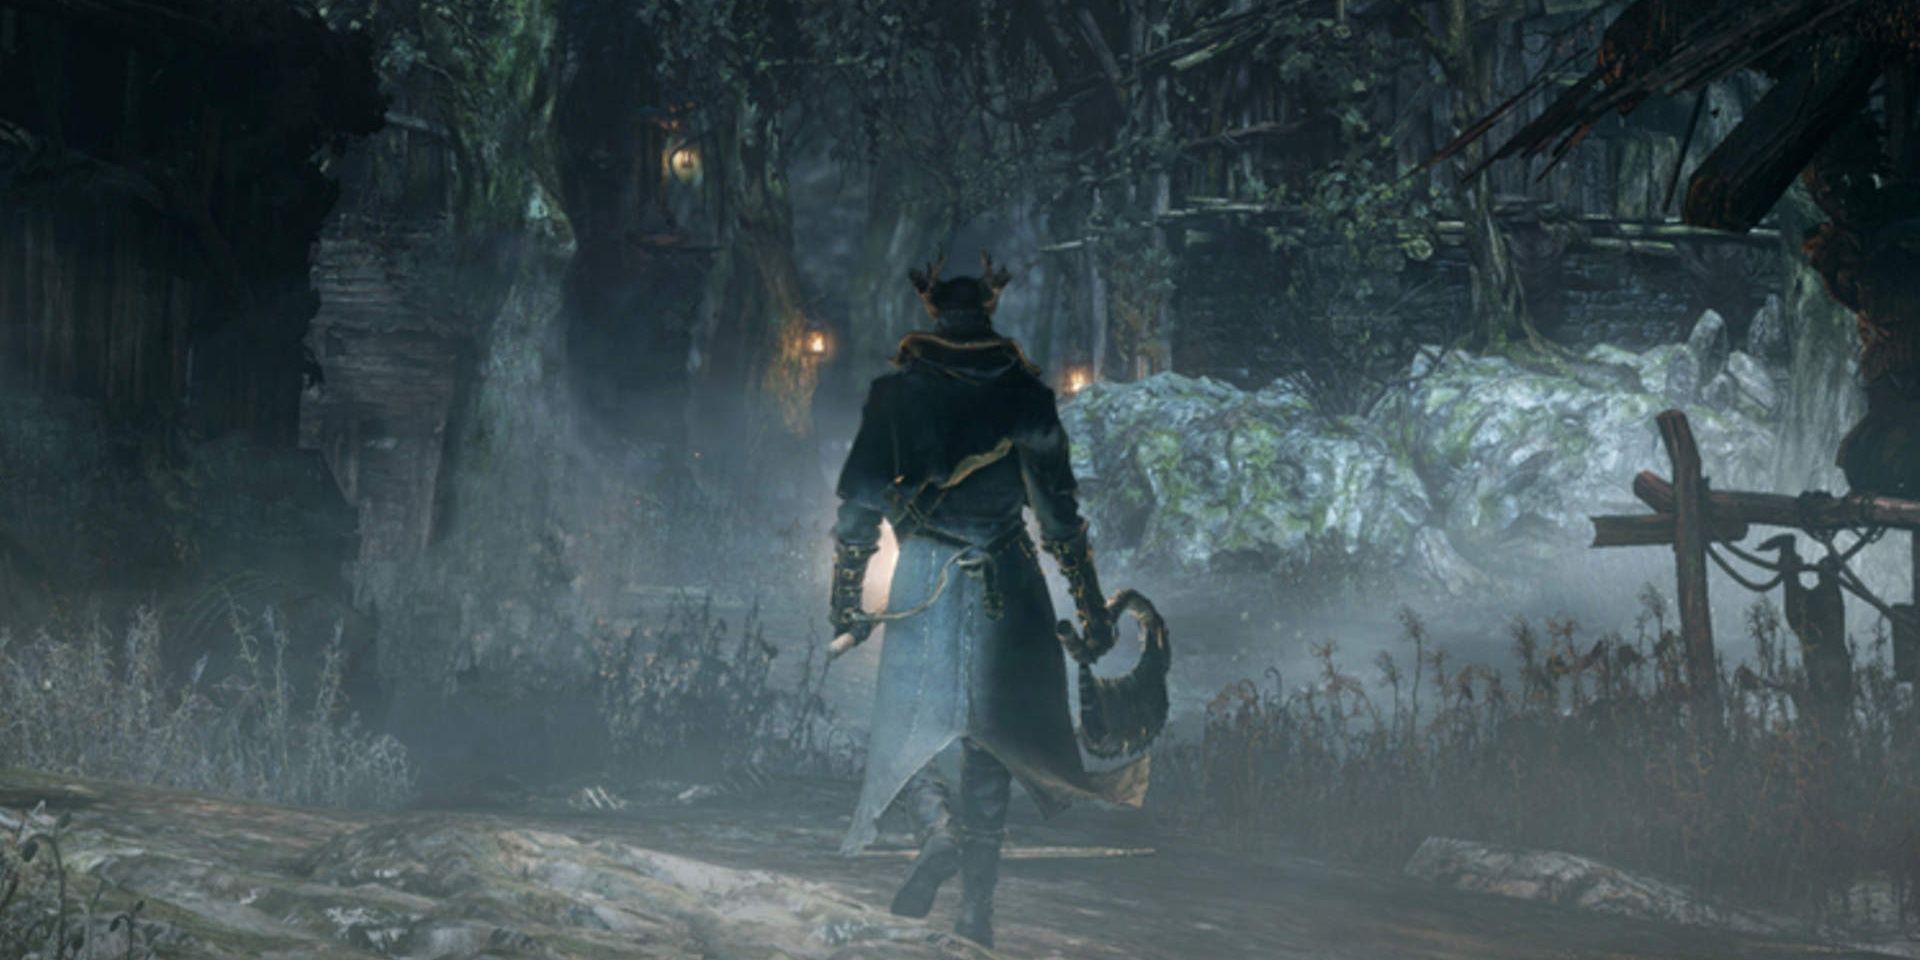 Why No Gothic Horror Game Lives up to Bloodborne